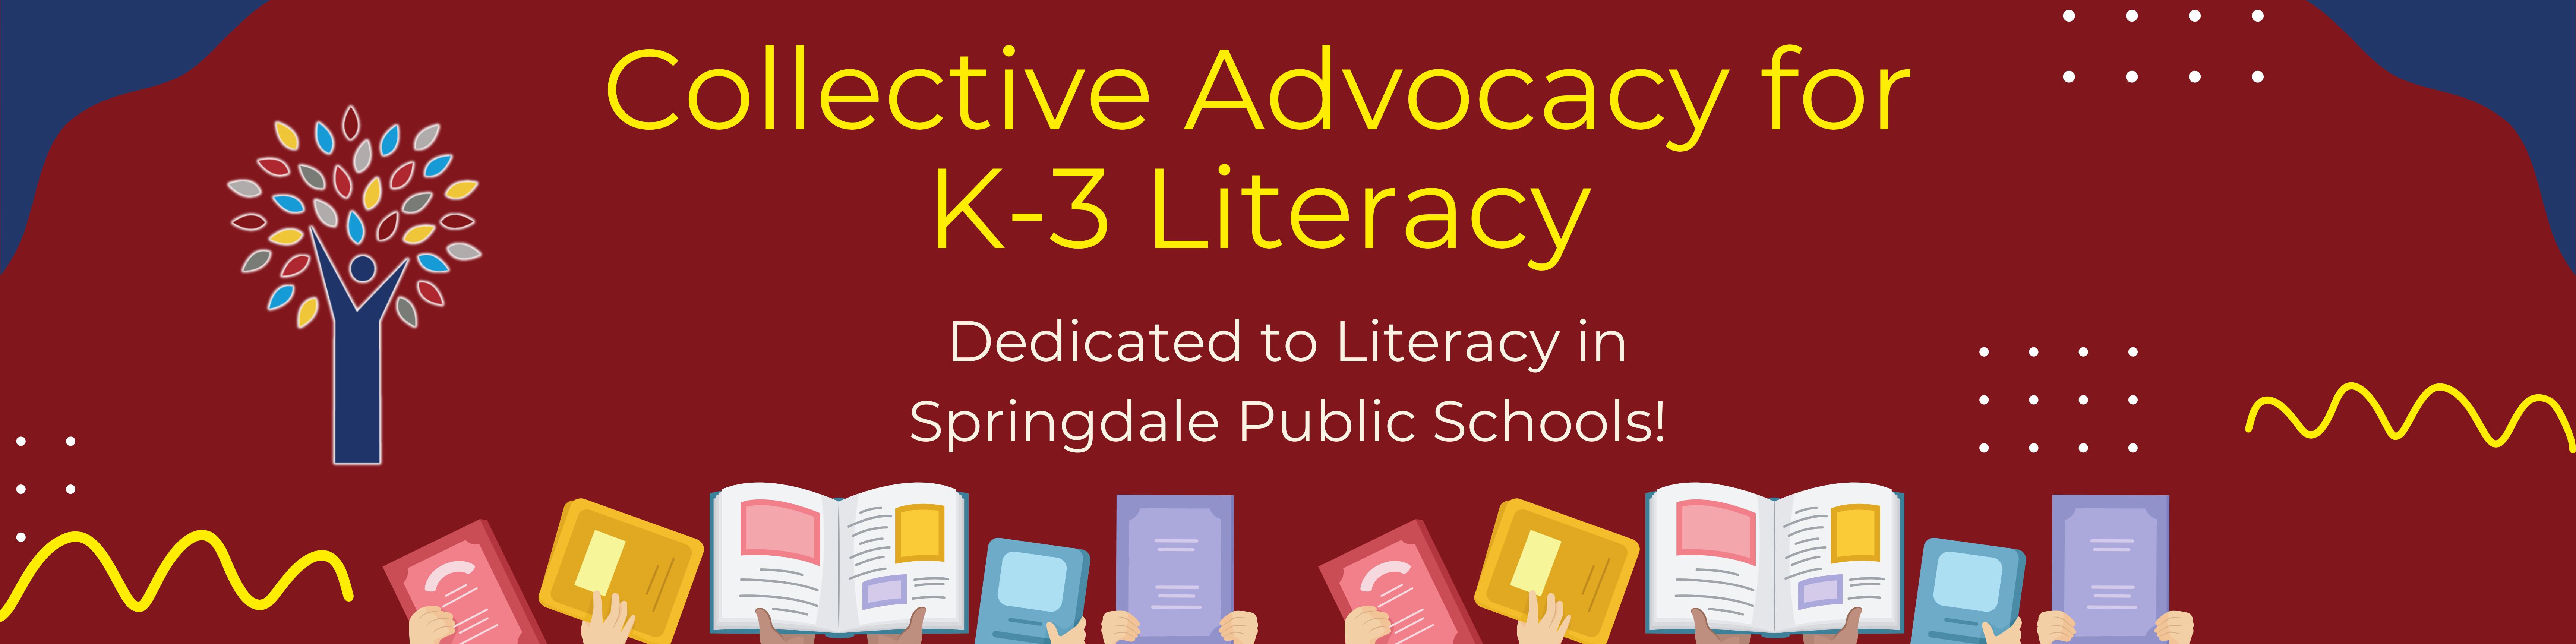 Collective Advocacy for K-3 Literacy. Dedicated to Literacy in Springdale Public Schools.